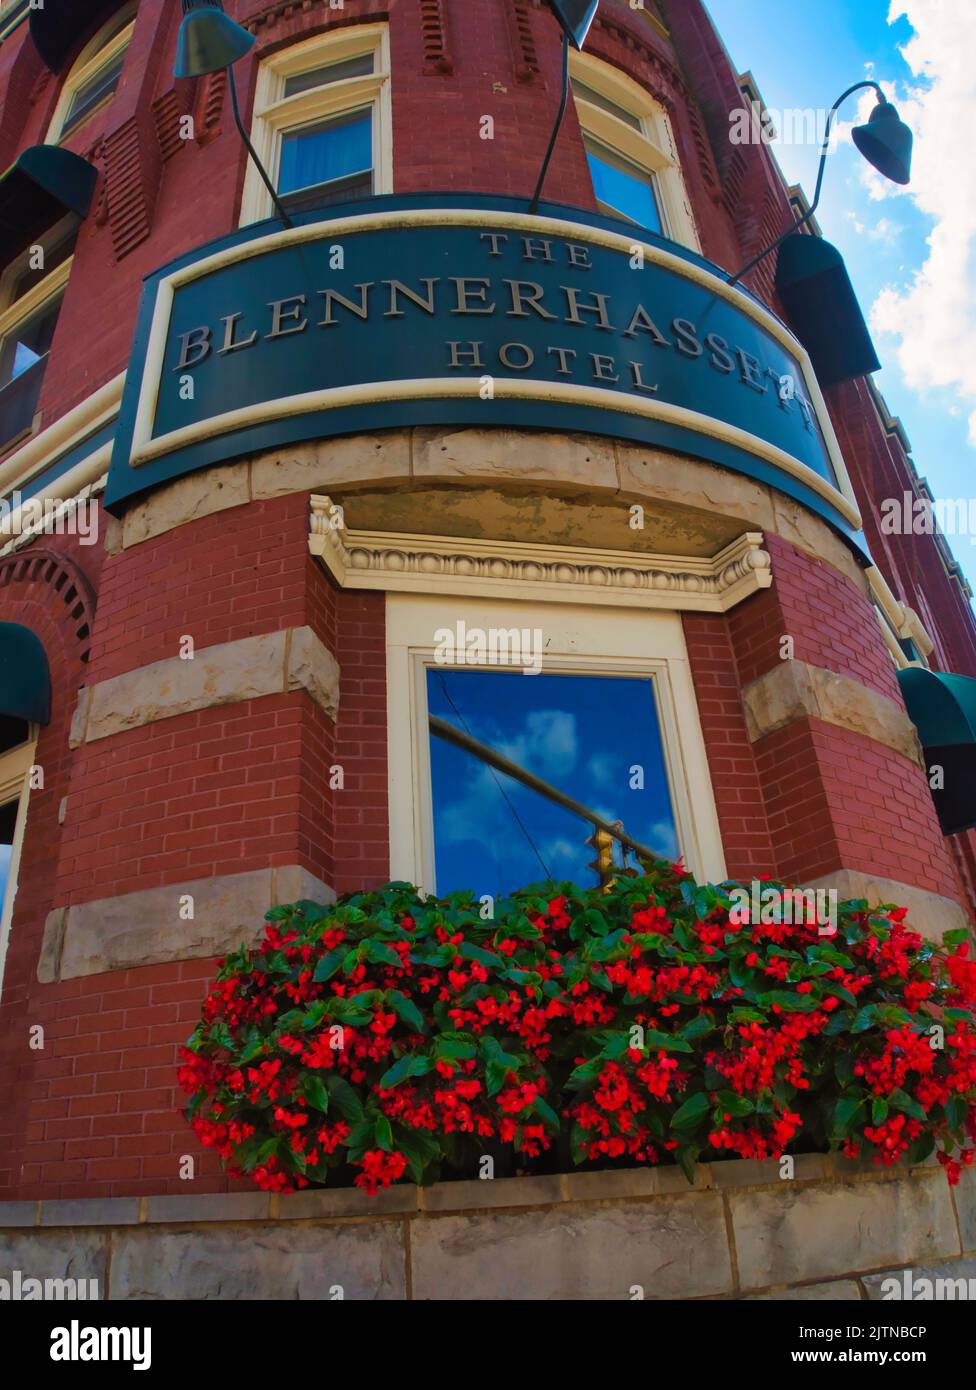 Blennerhassett Hotel is a historic hotel located at Parkersburg, Wood County, West Virginia. Stock Photo